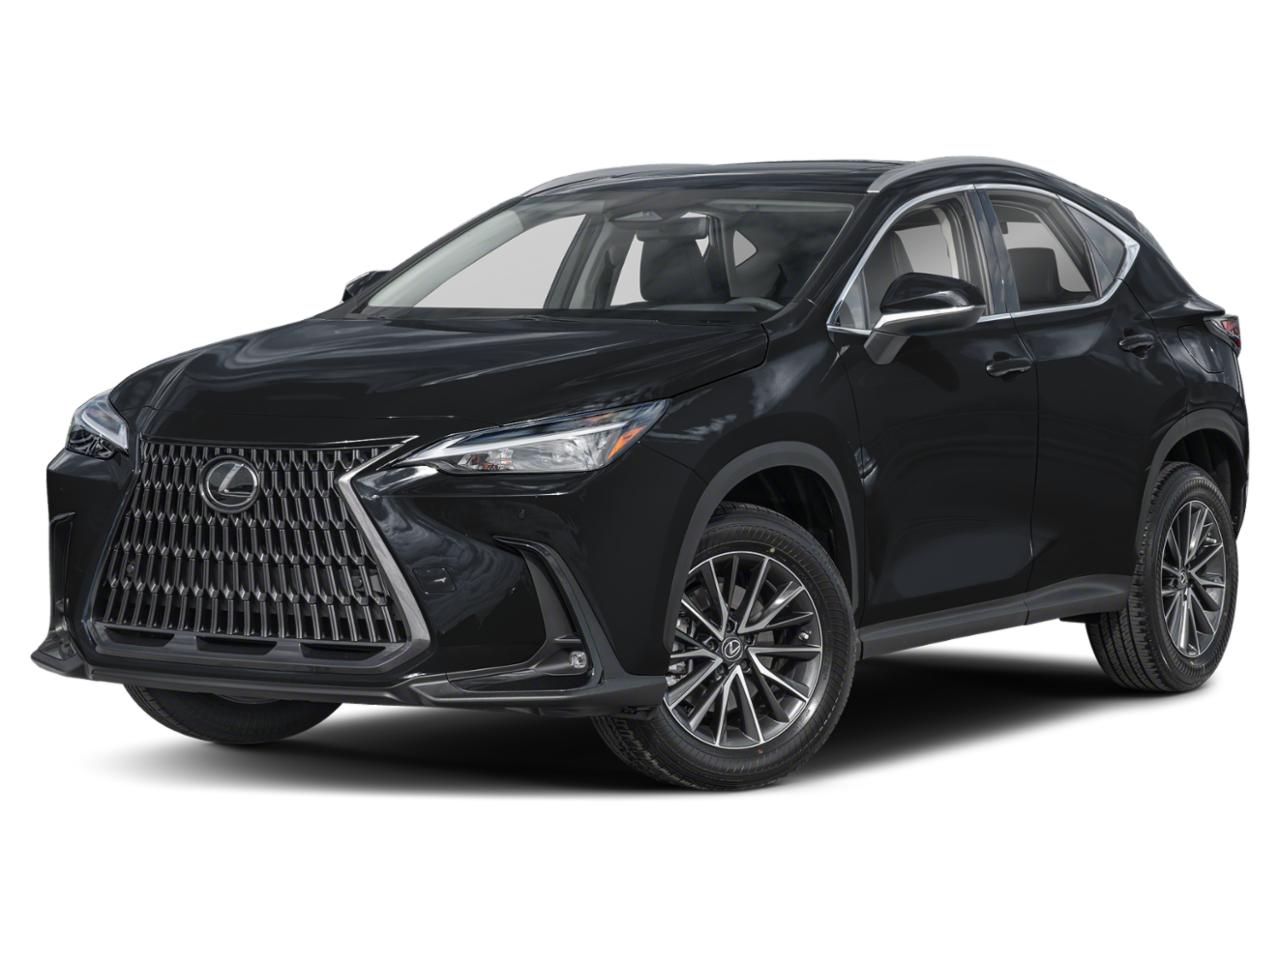 Search New Lexus Models for Sale in Dallas, Fort Worth, Houston 